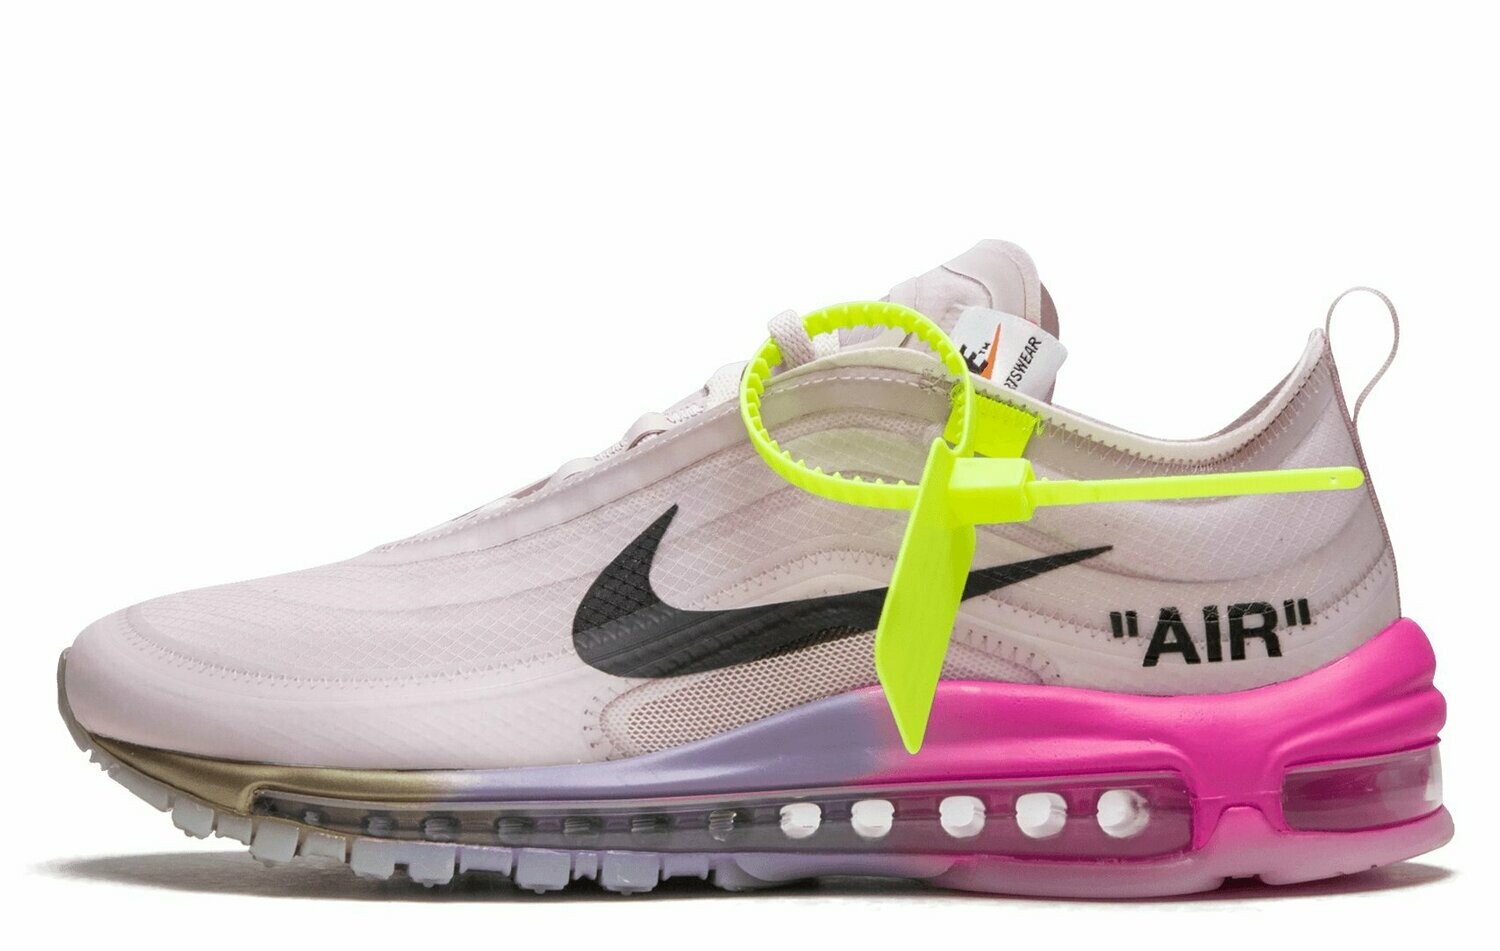 Williams x Off-White Air Max OG “Queen”